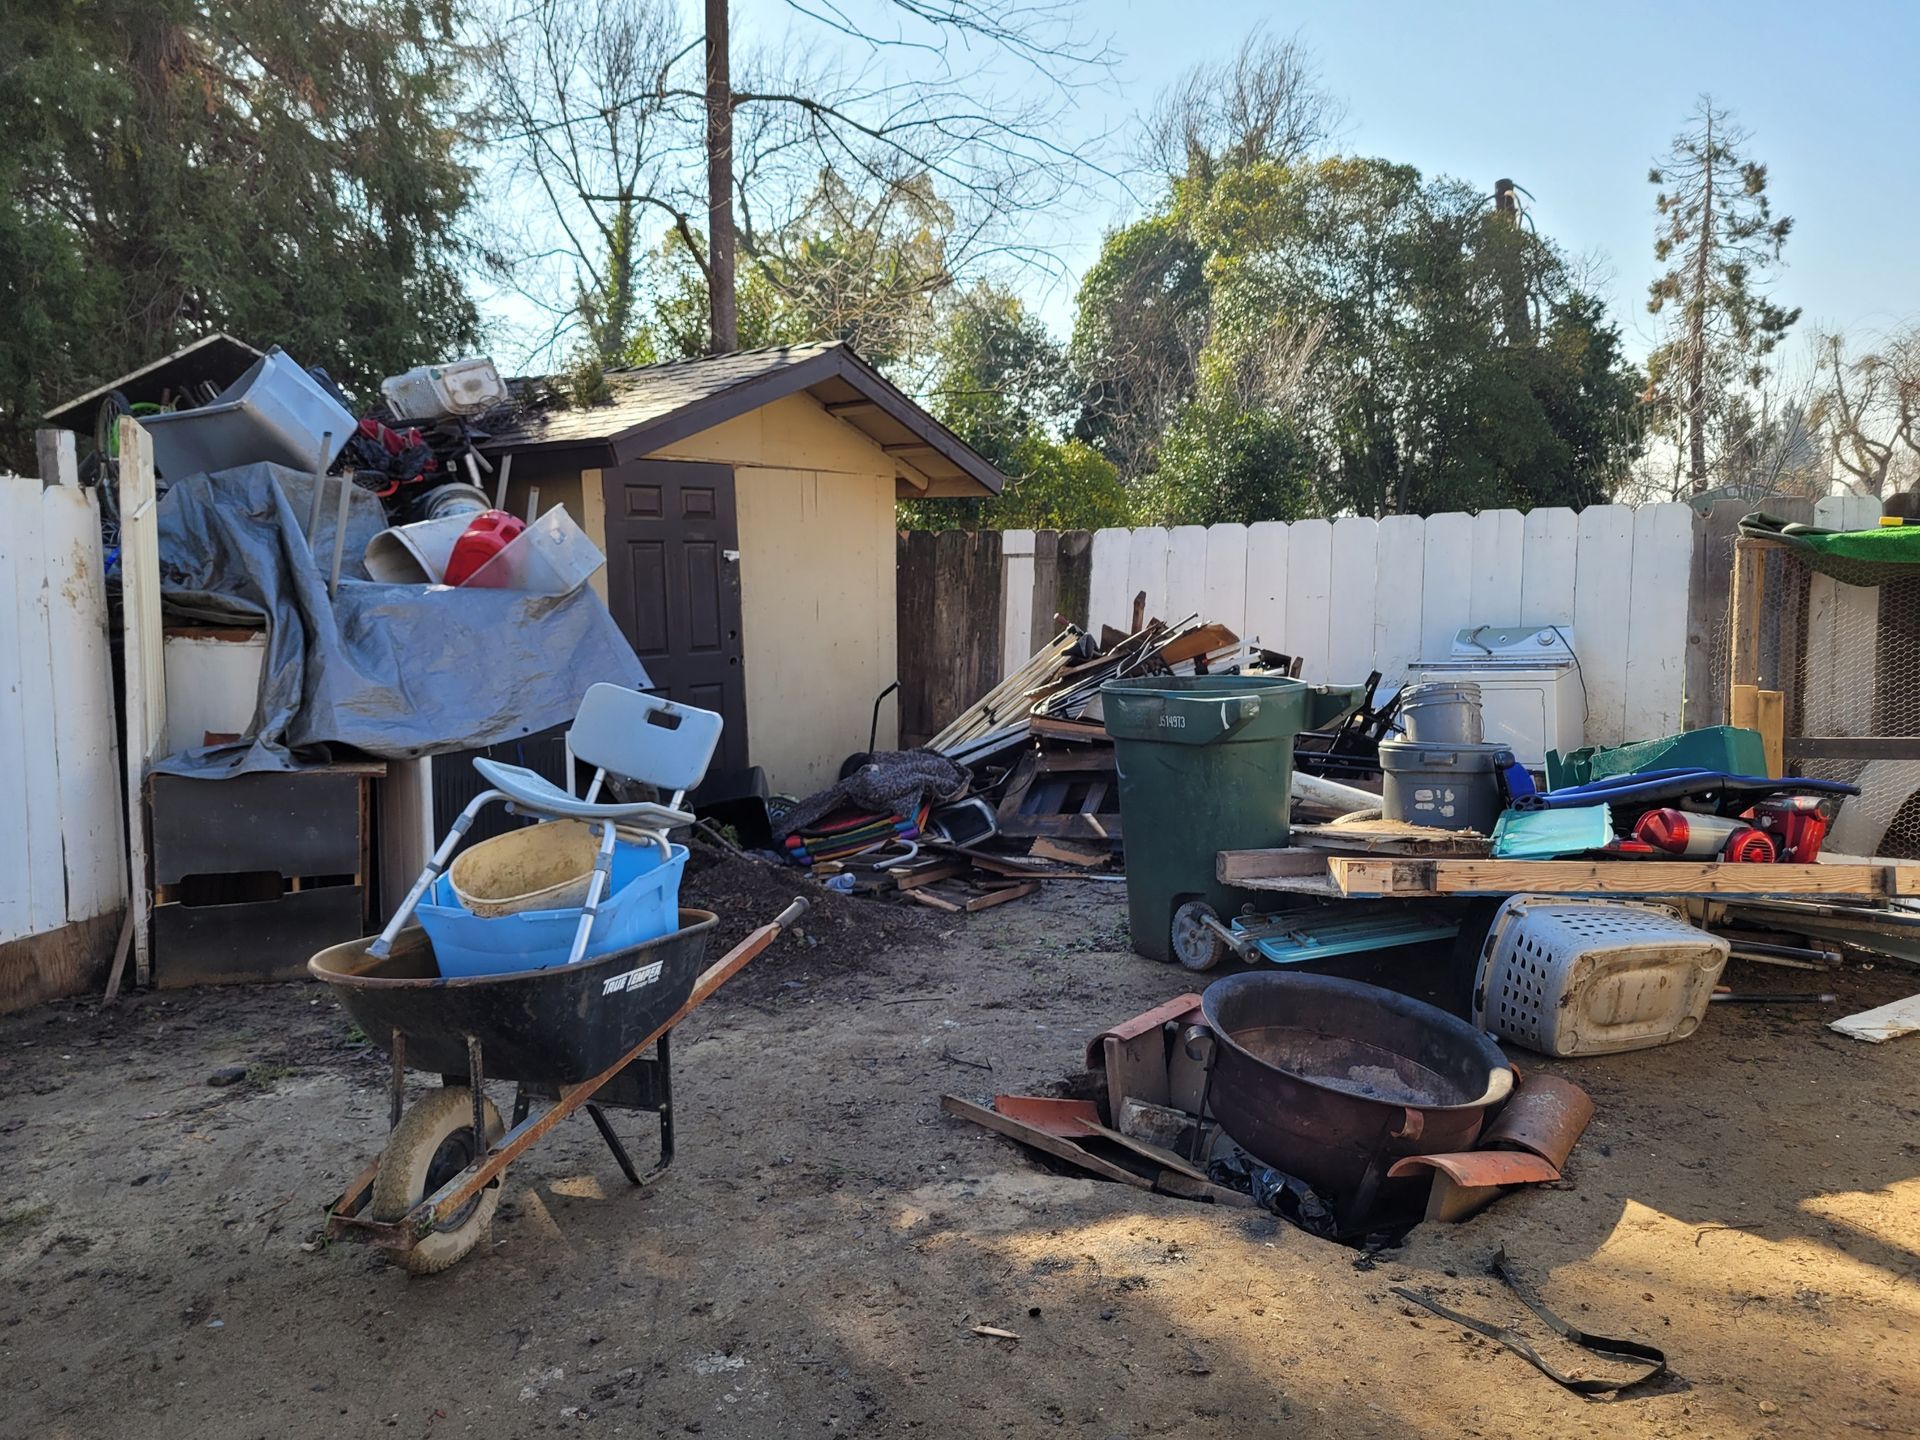 a pile of trash and junk that is as tall as the shed it is next to with various other items laid out in front of it